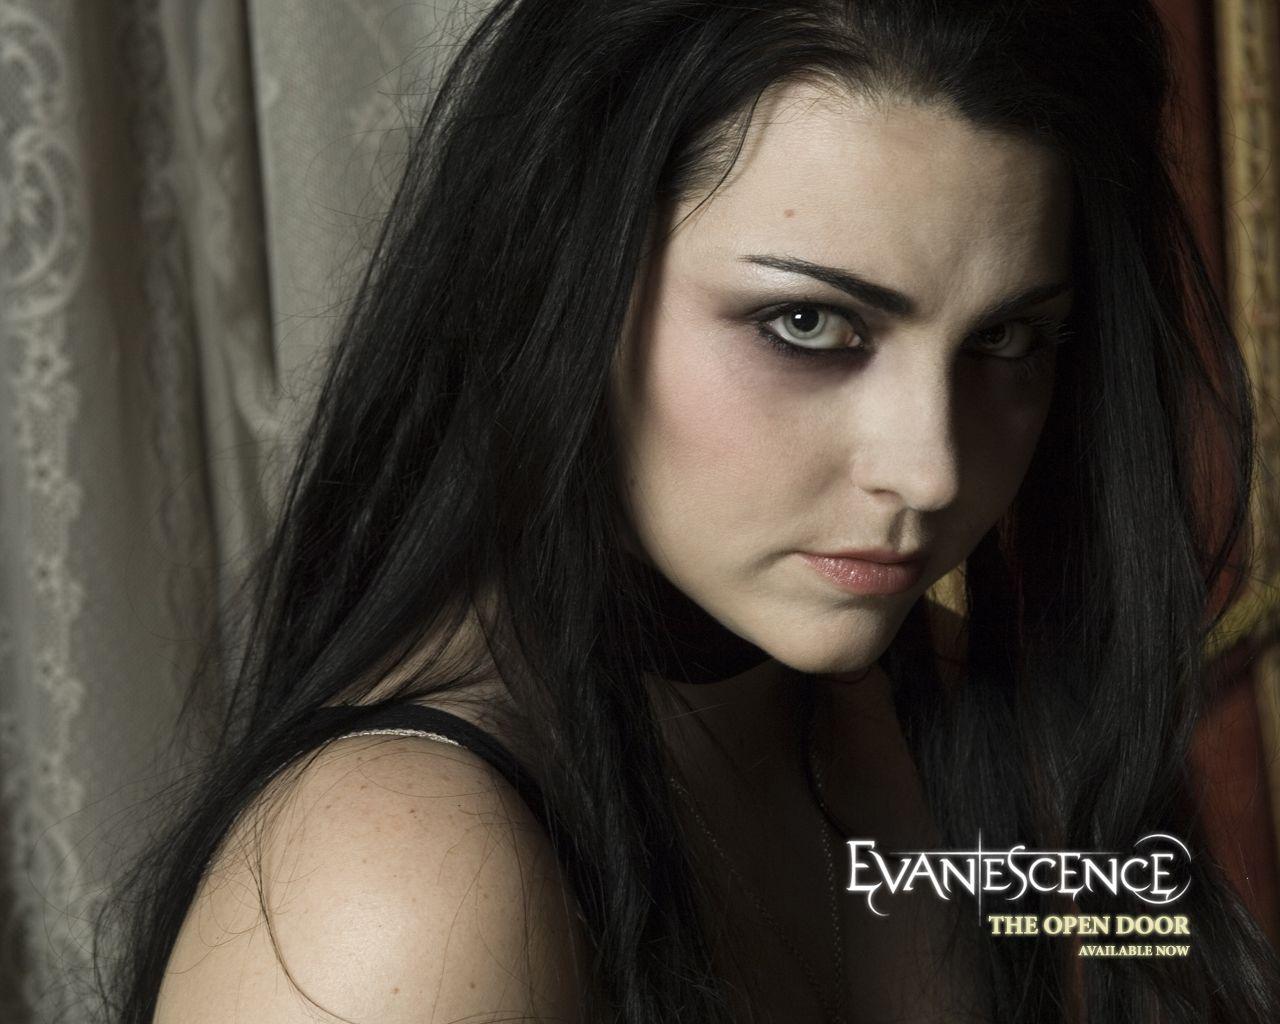 Evanescence image Amy Lee HD wallpaper and background photo